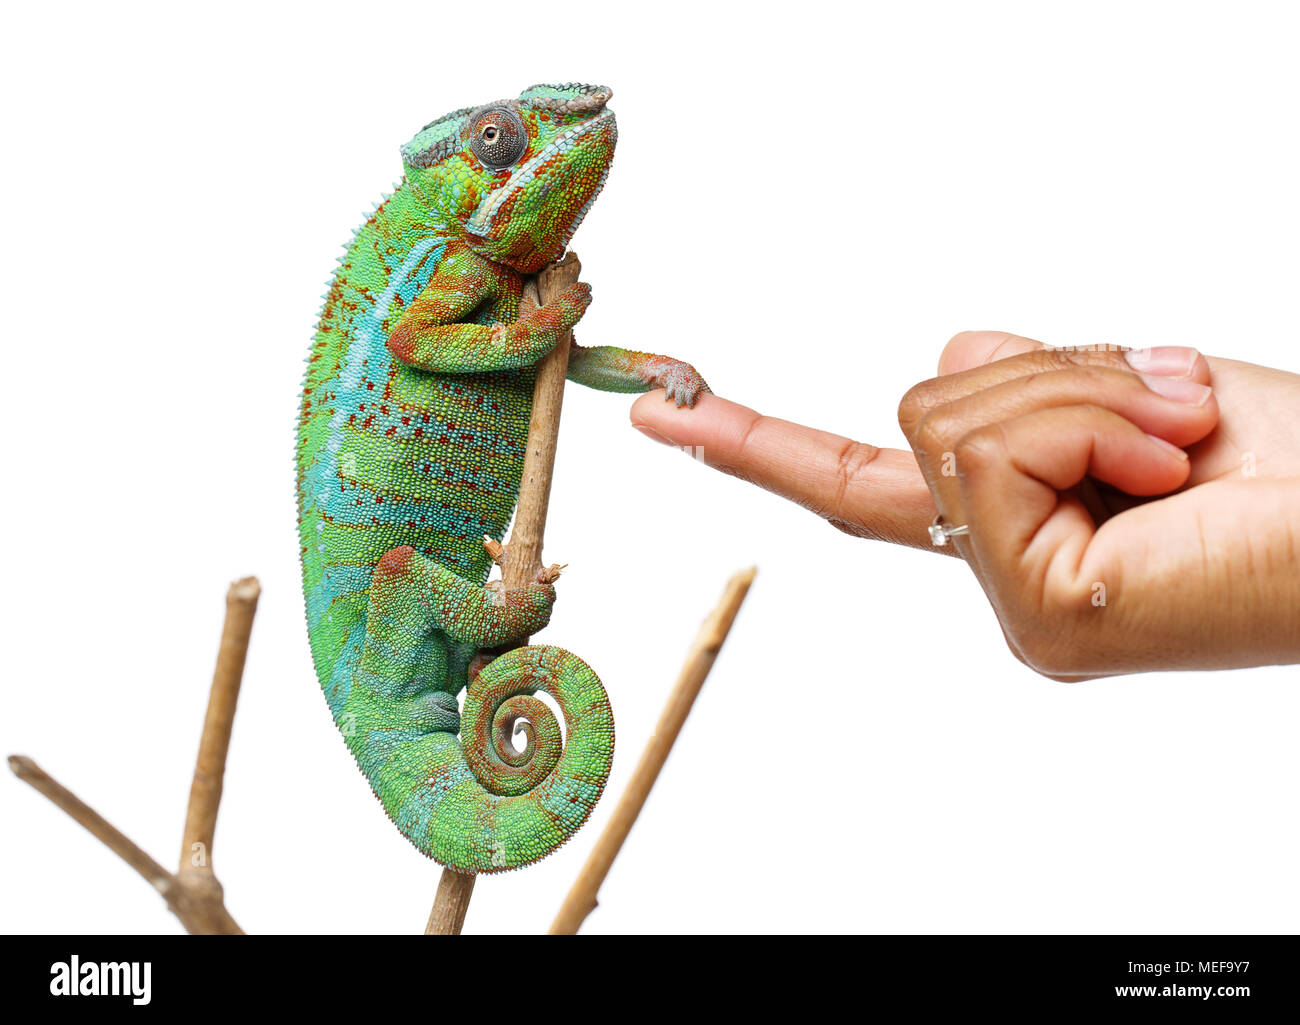 alive chameleon reptile sitting on branch holding human hand. studio shot isolated on white background. copy space. Stock Photo